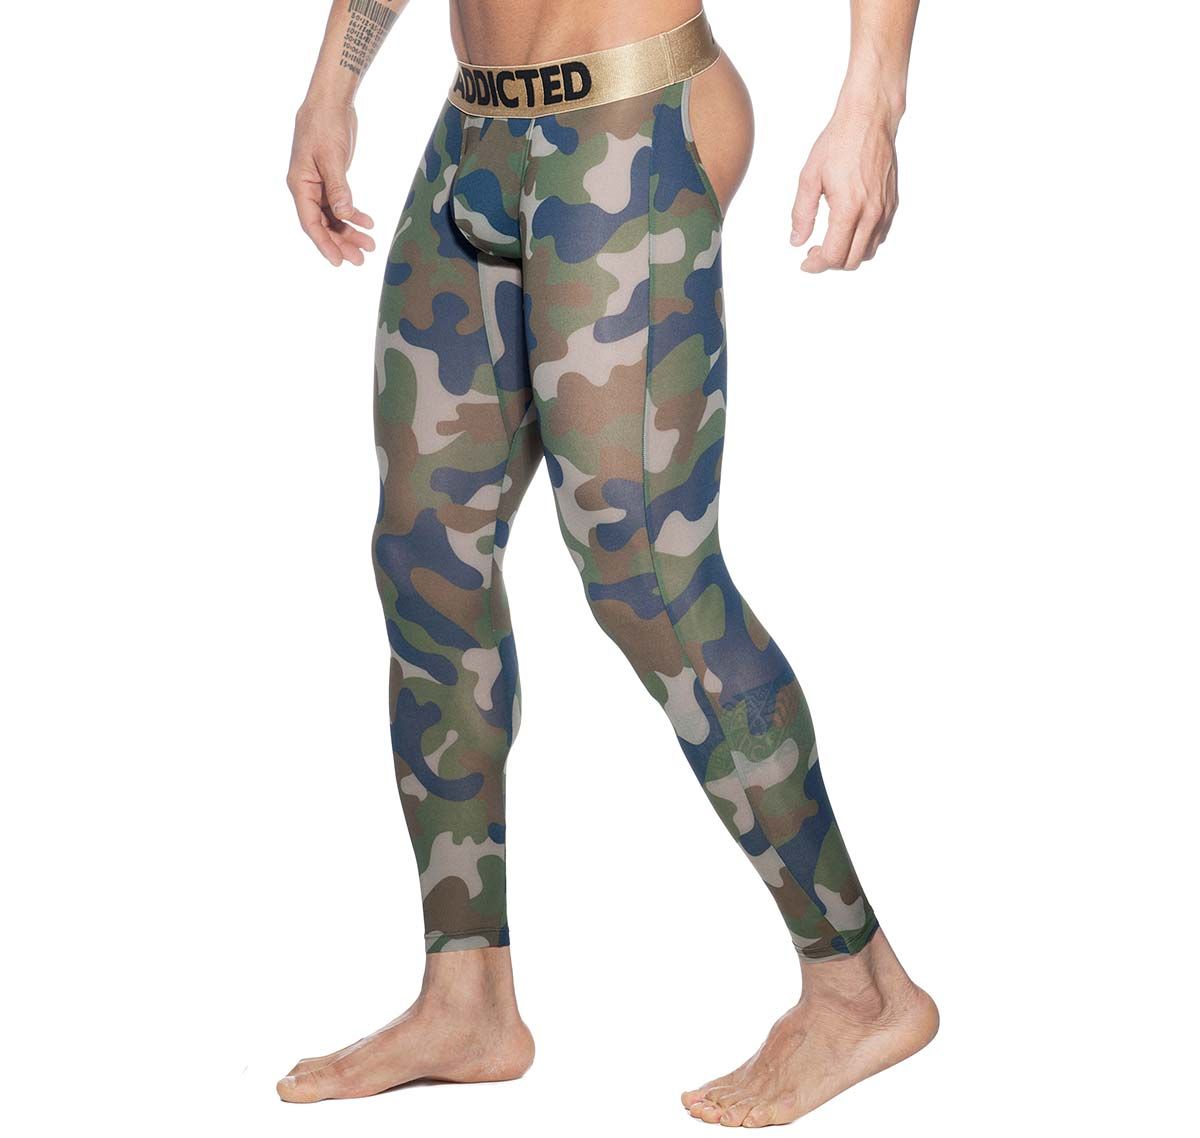 Addicted long underpants BOTTOMLESS CAMO LONG JOHN AD695, camouflage